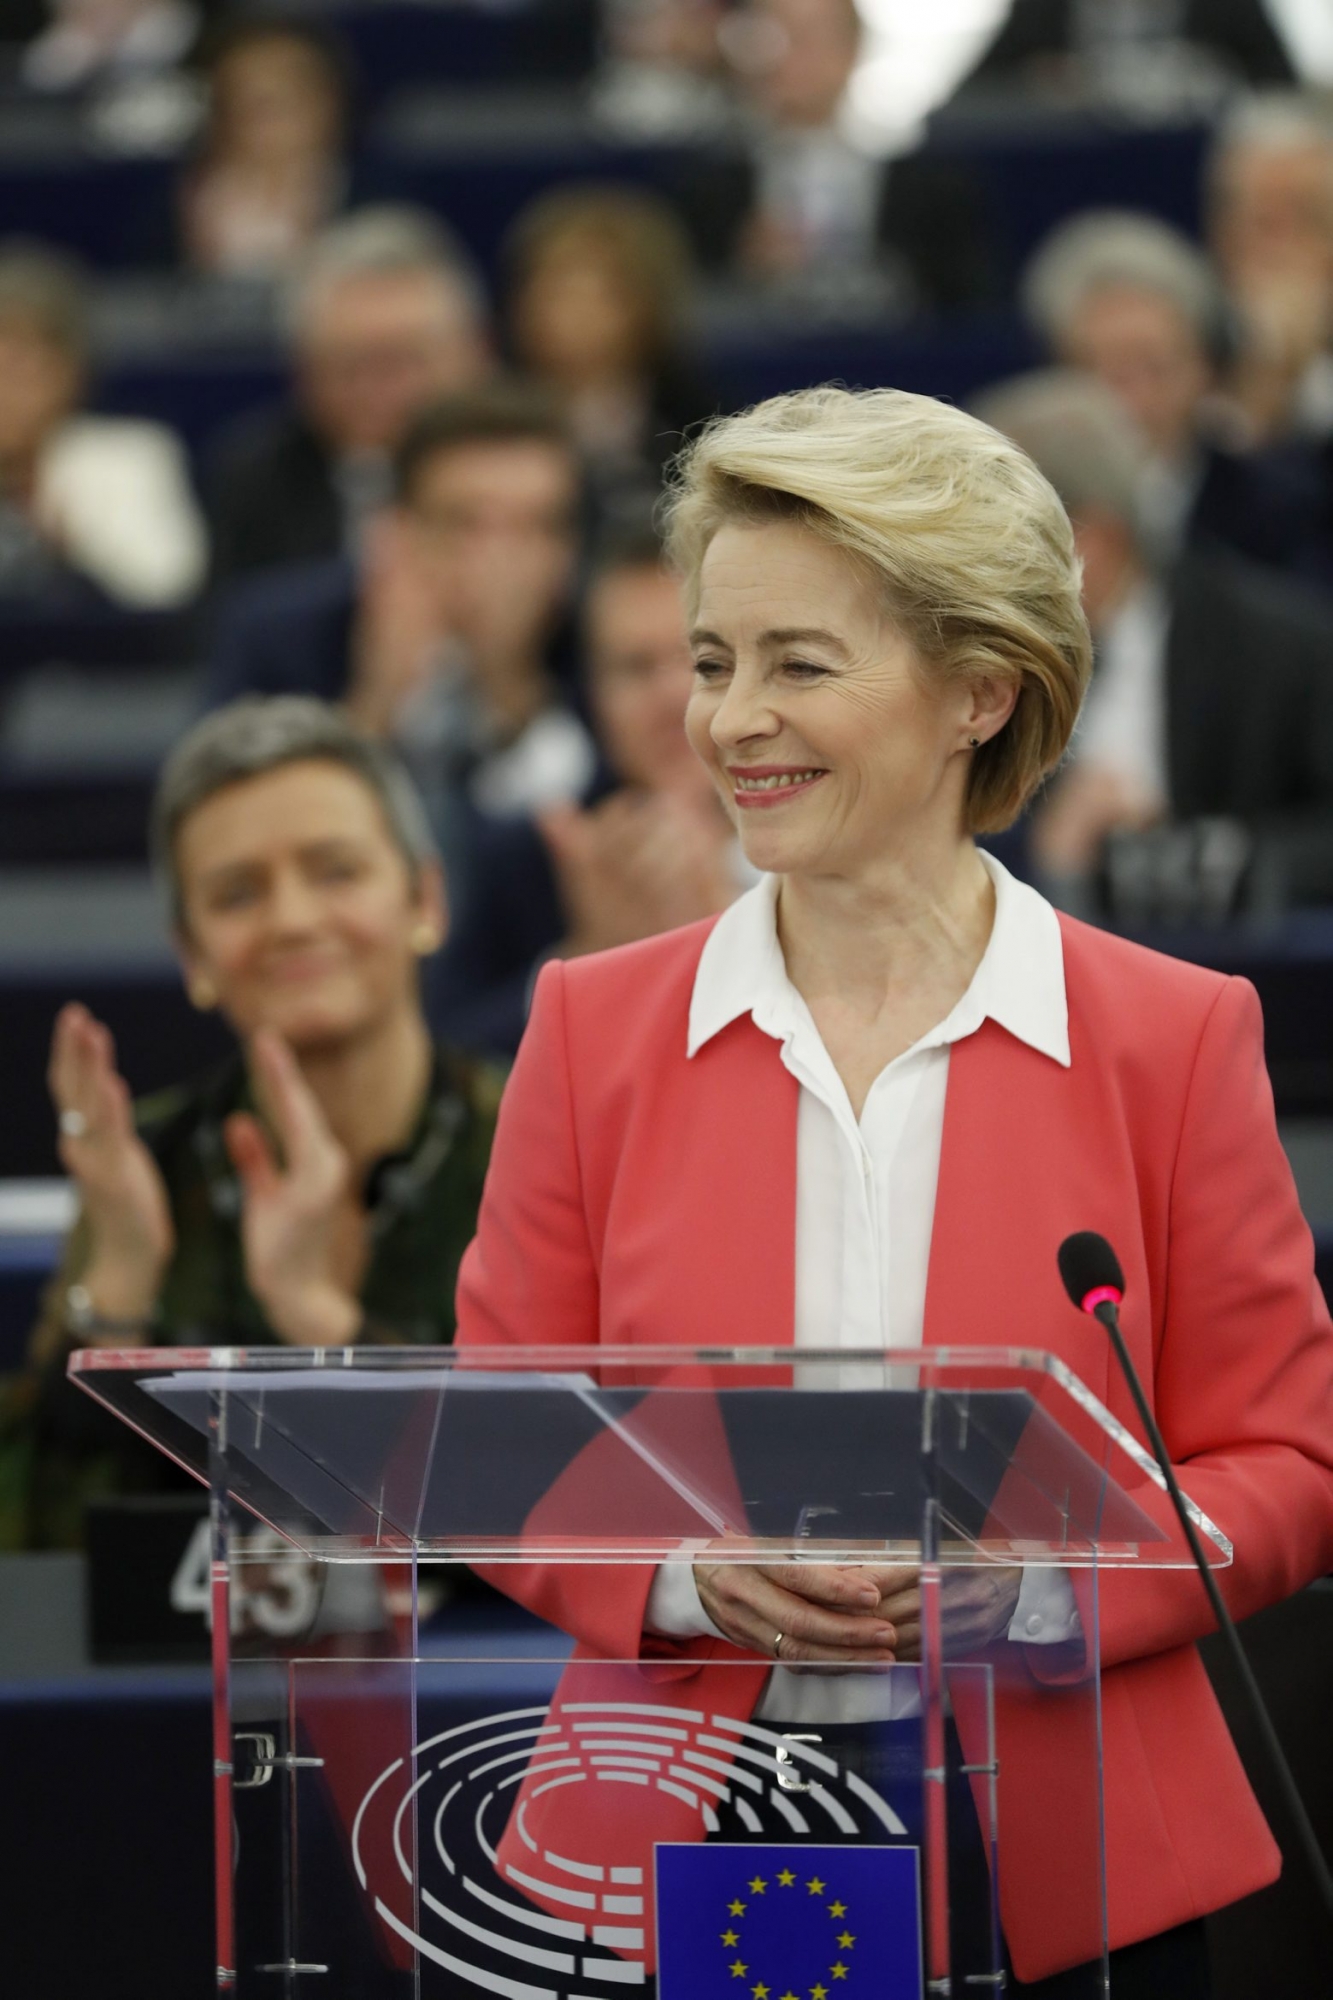 European Commission President Ursula von der Leyen delivers her speech at the European Parliament Wednesday, Nov. 27, 2019 in Strasbourg, eastern France. Ursula von der Leyen, will present her team of Commissioners-designate to the European Parliament and discuss the new Commission's objectives with MEPs (AP Photo/Jean-Francois Badias) France EU